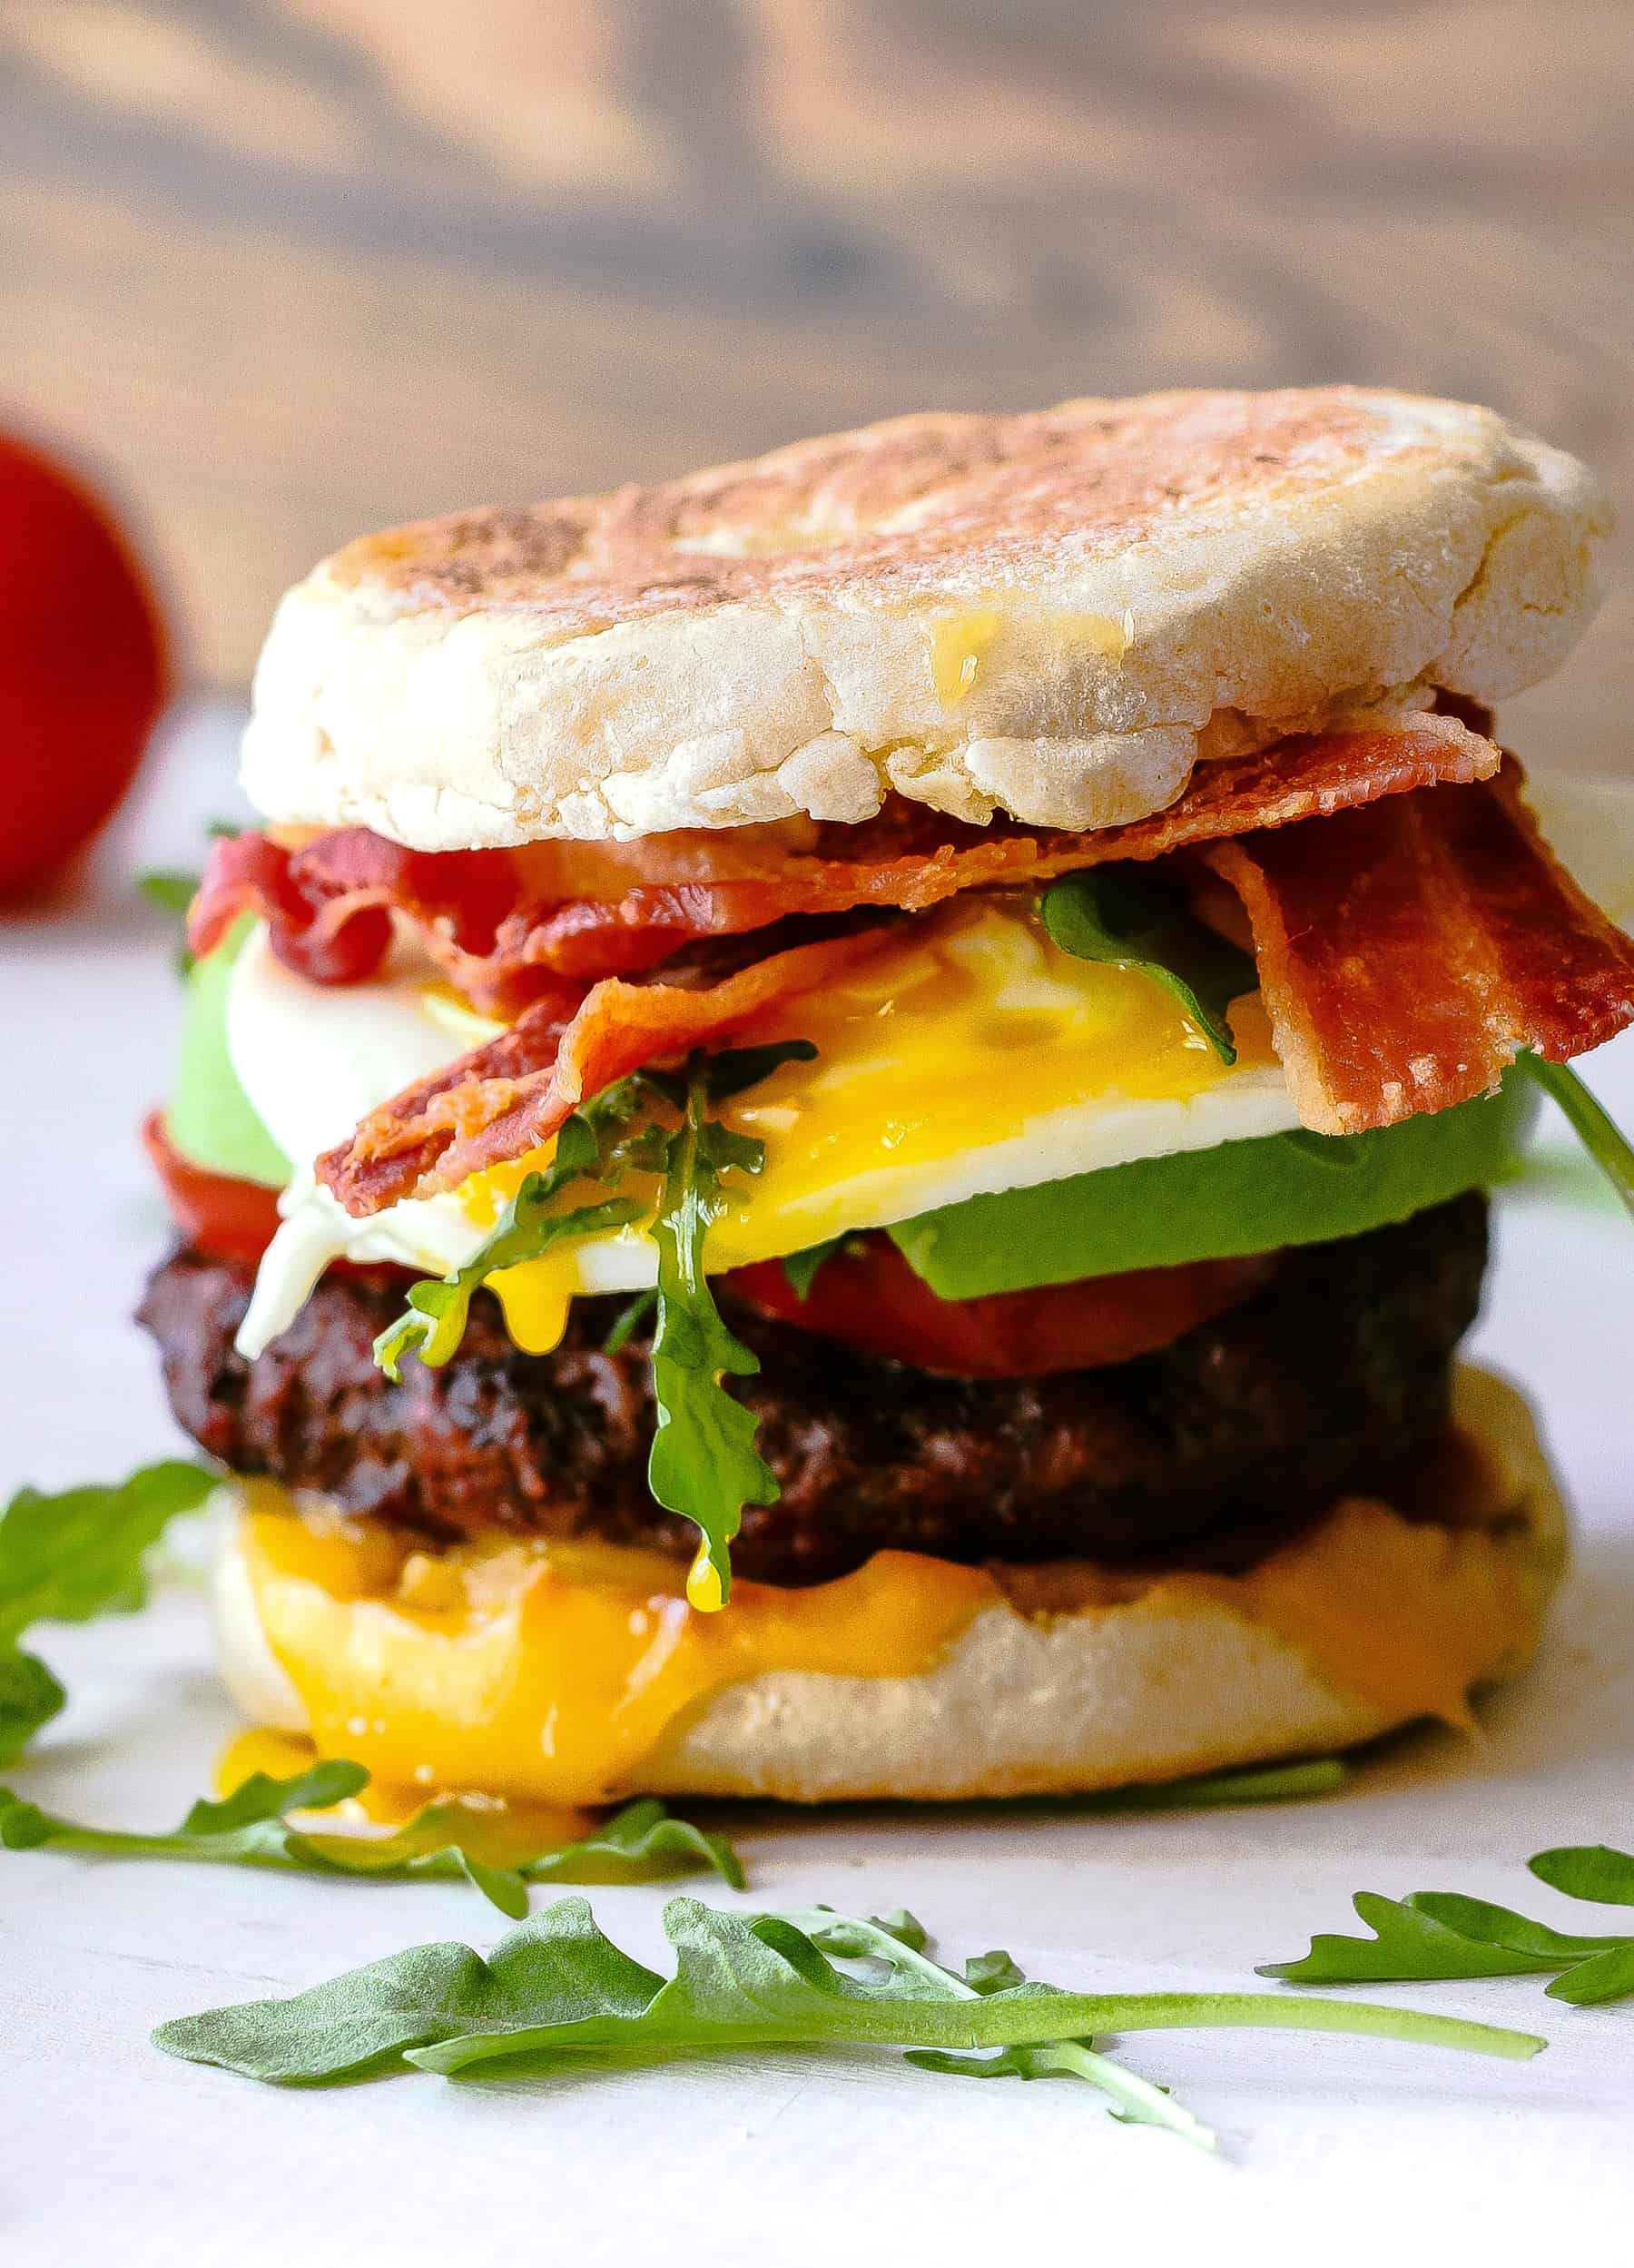 Breakfast burger plated with bacon, cheese, a burger patty, avocado, and eggs